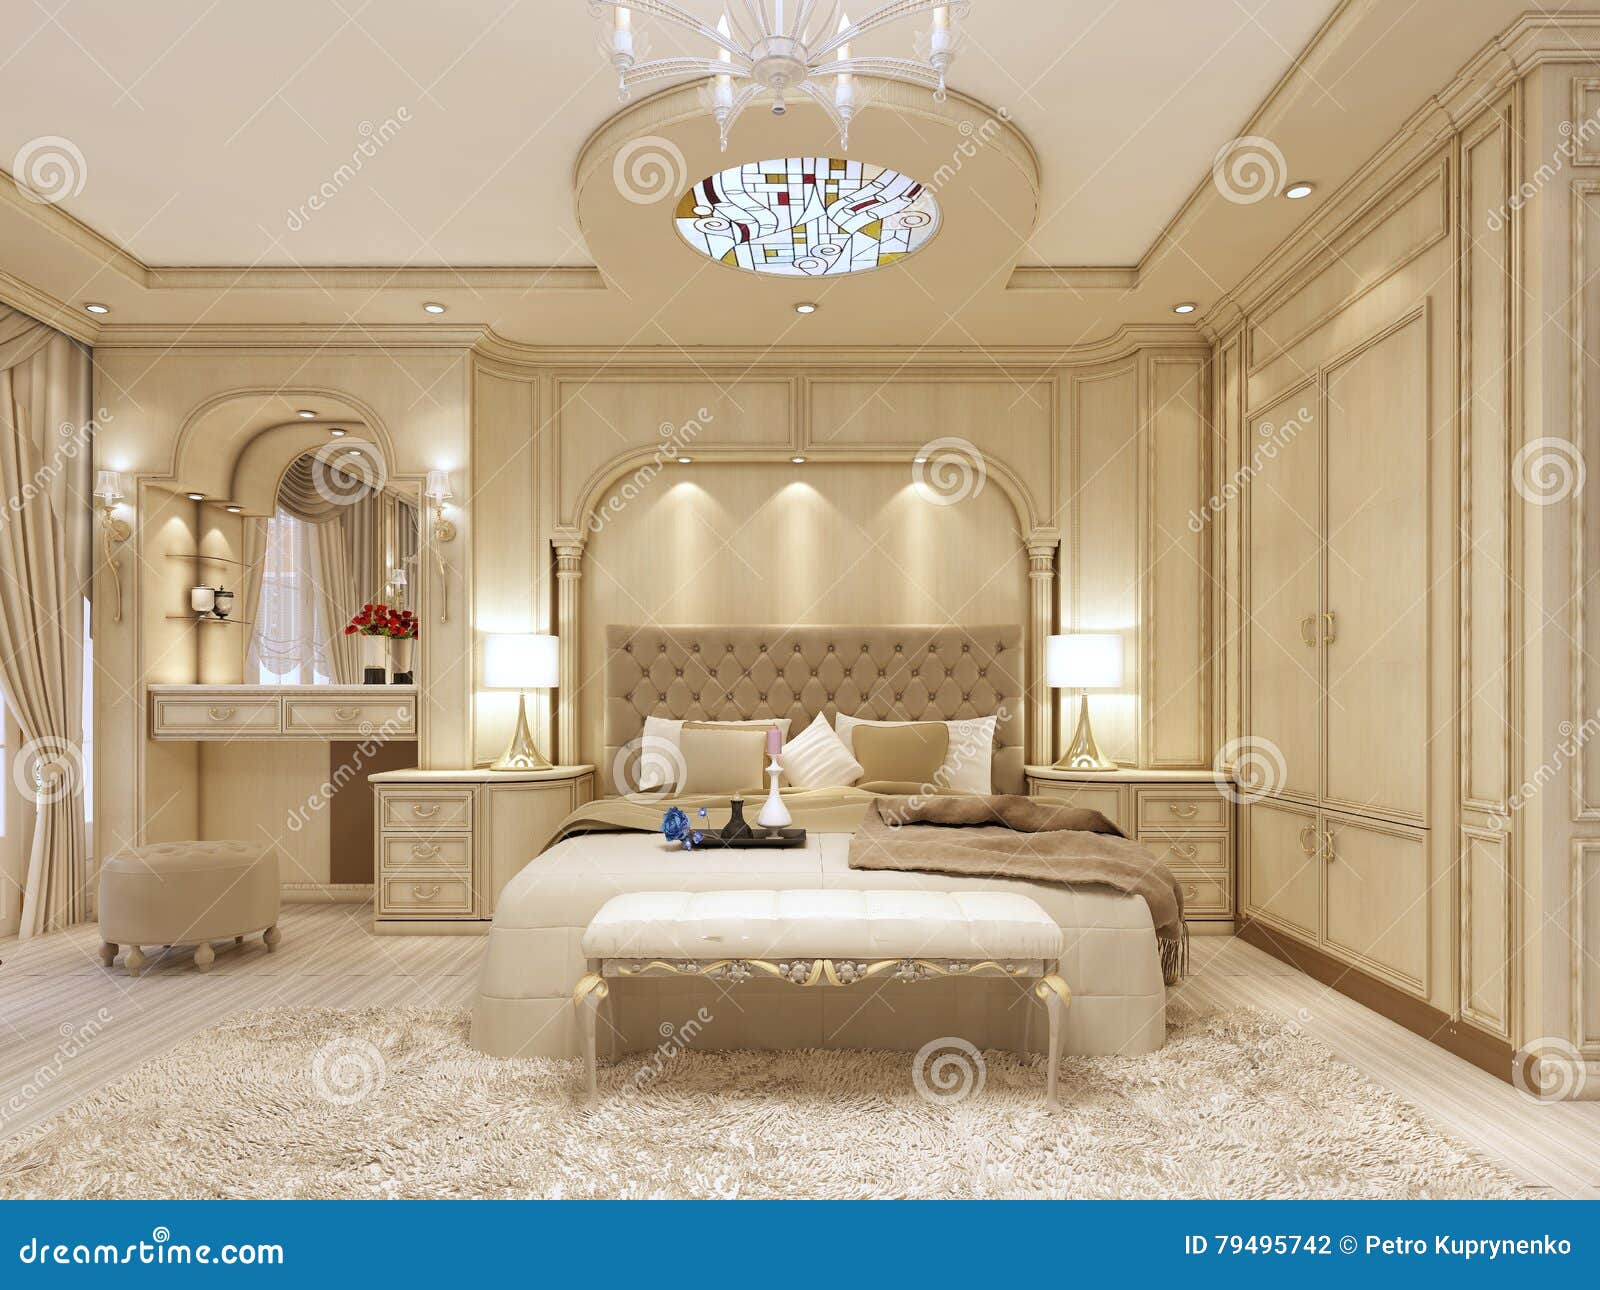 Luxury Bed In A Large Neoclassical Bedroom With Decorative